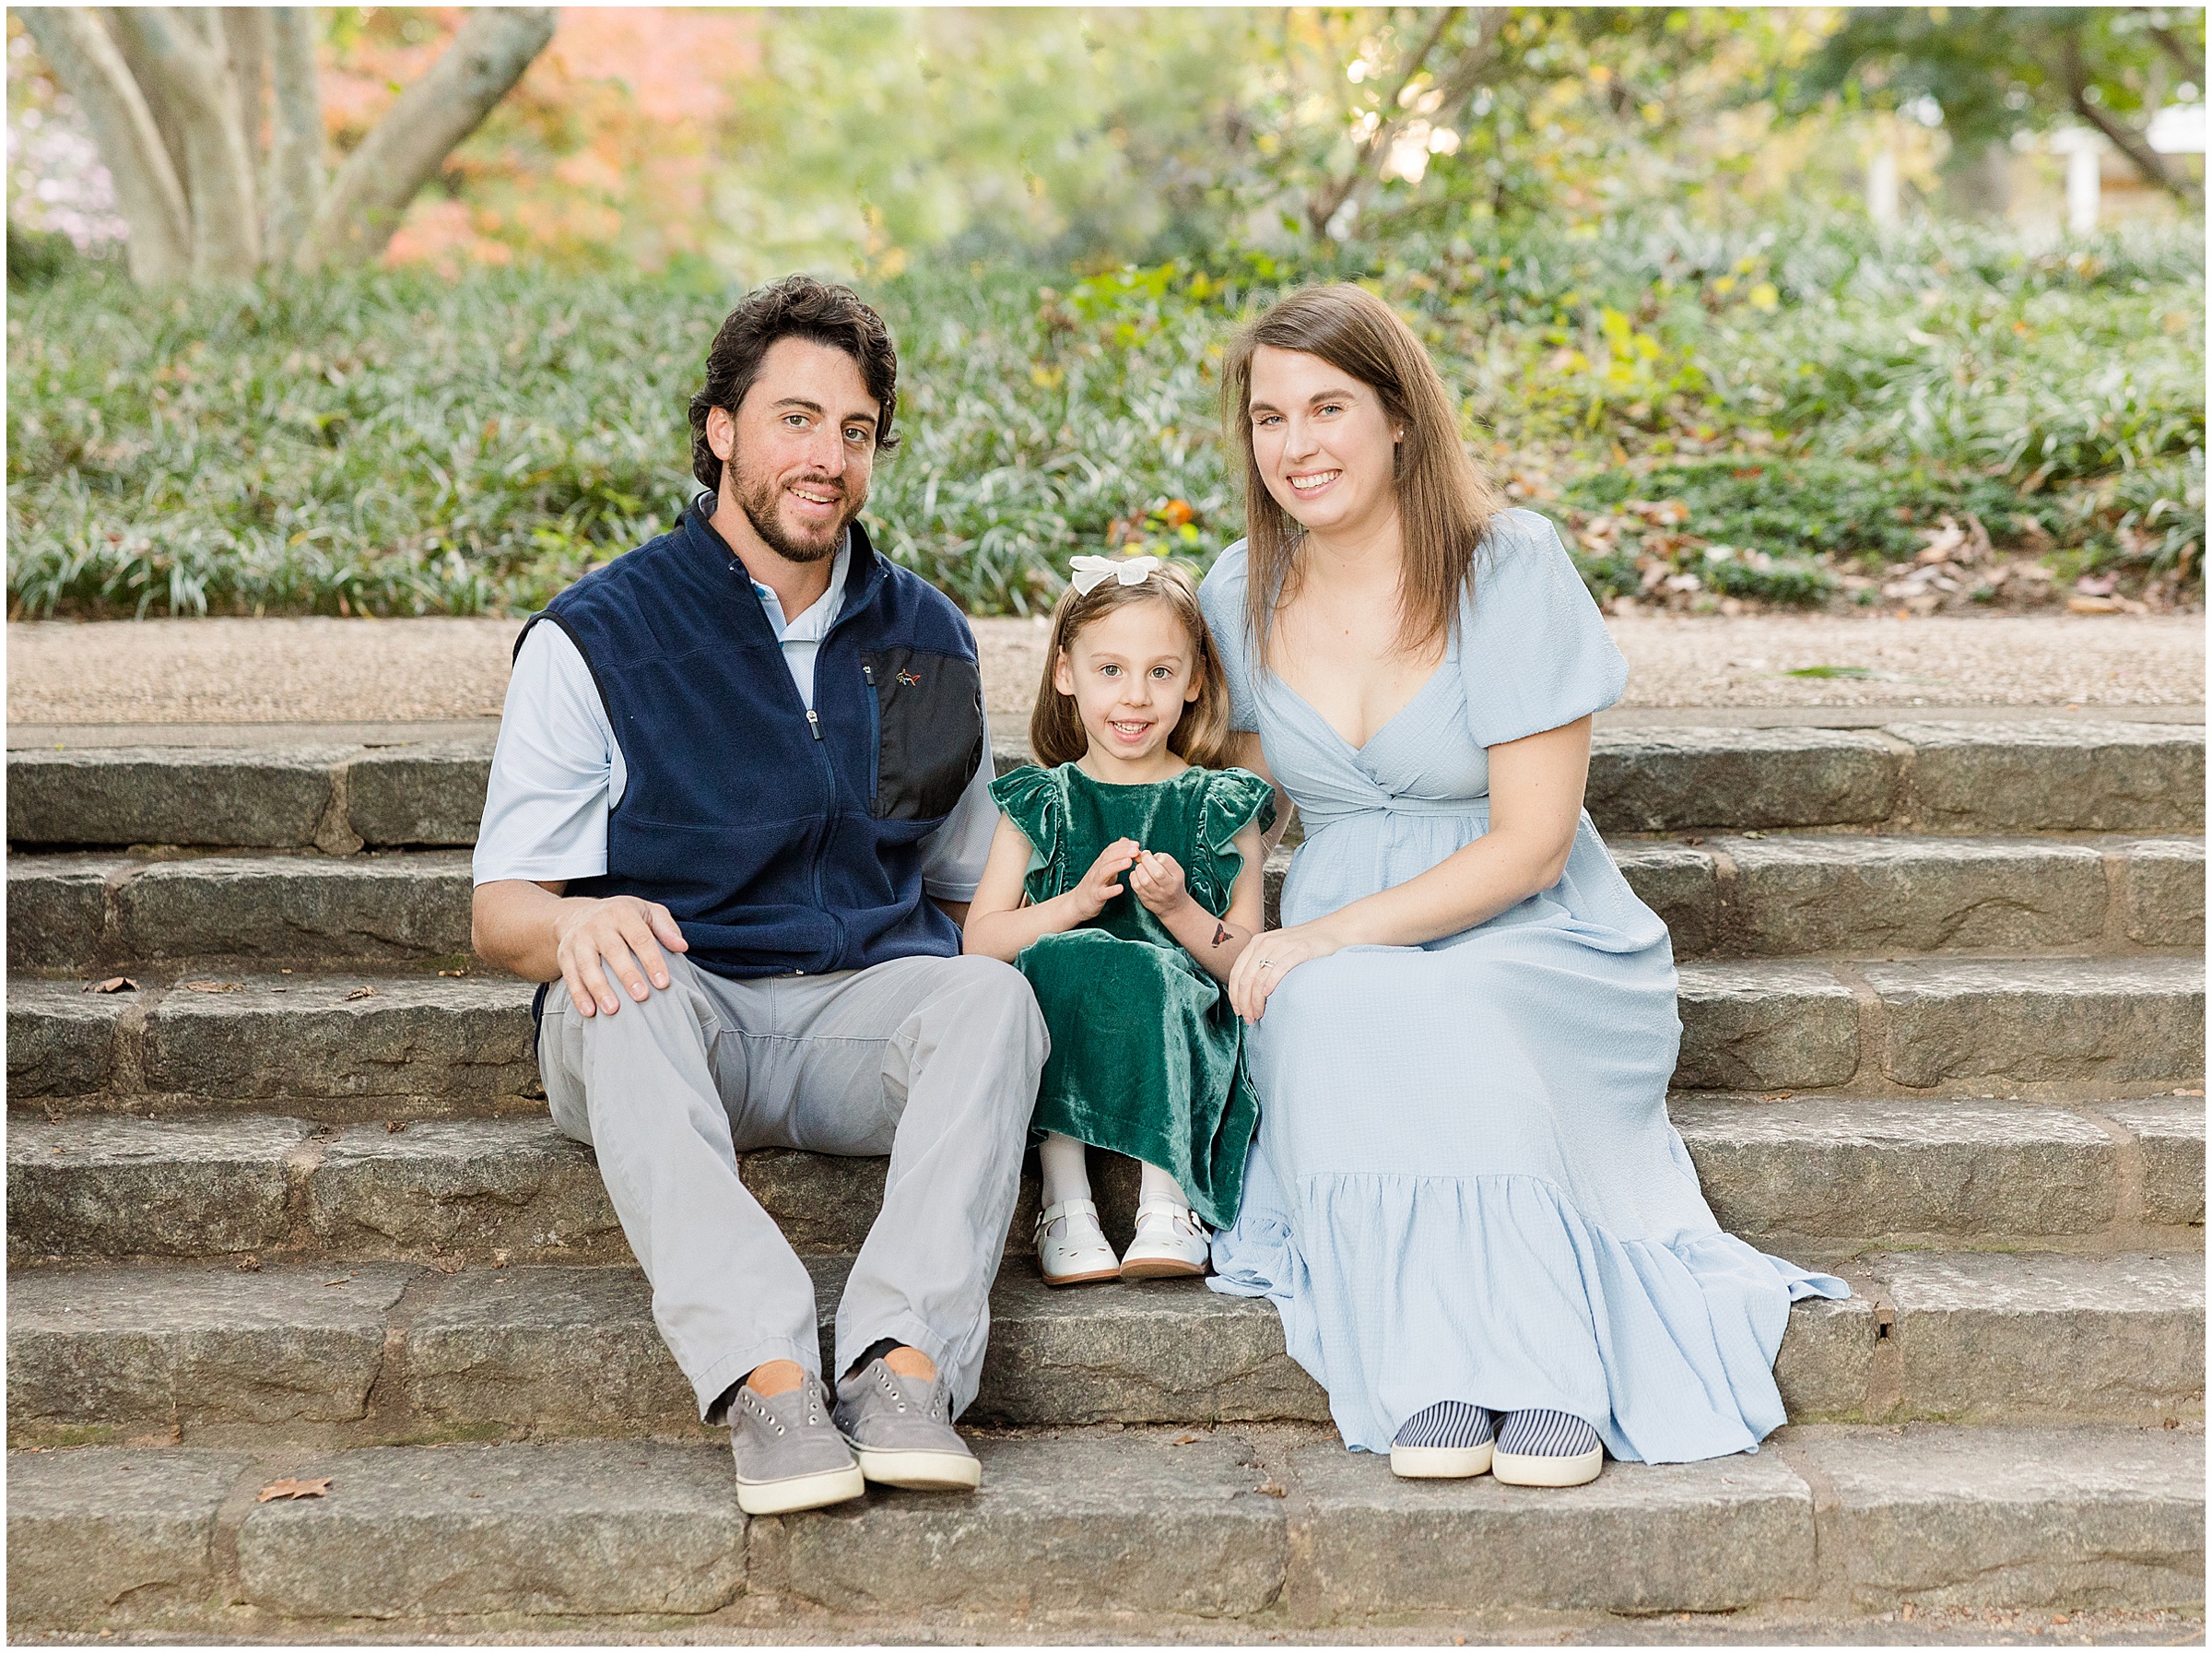 Fall mini sessions in Raleigh Durham NC